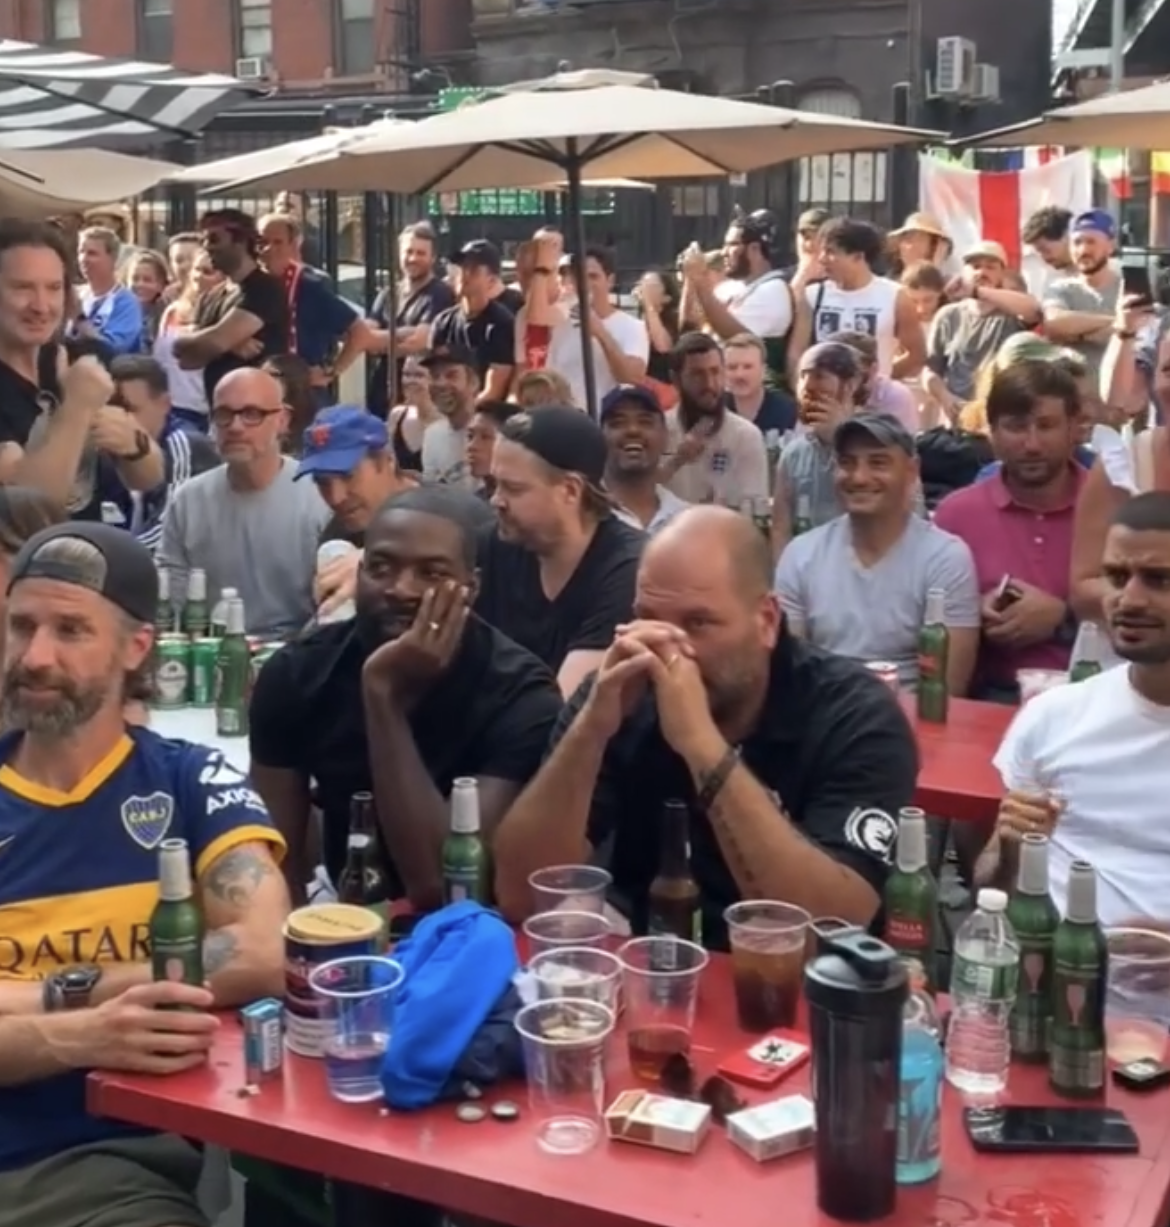 2023 FA Cup Final Watch Party at the Ground NYC